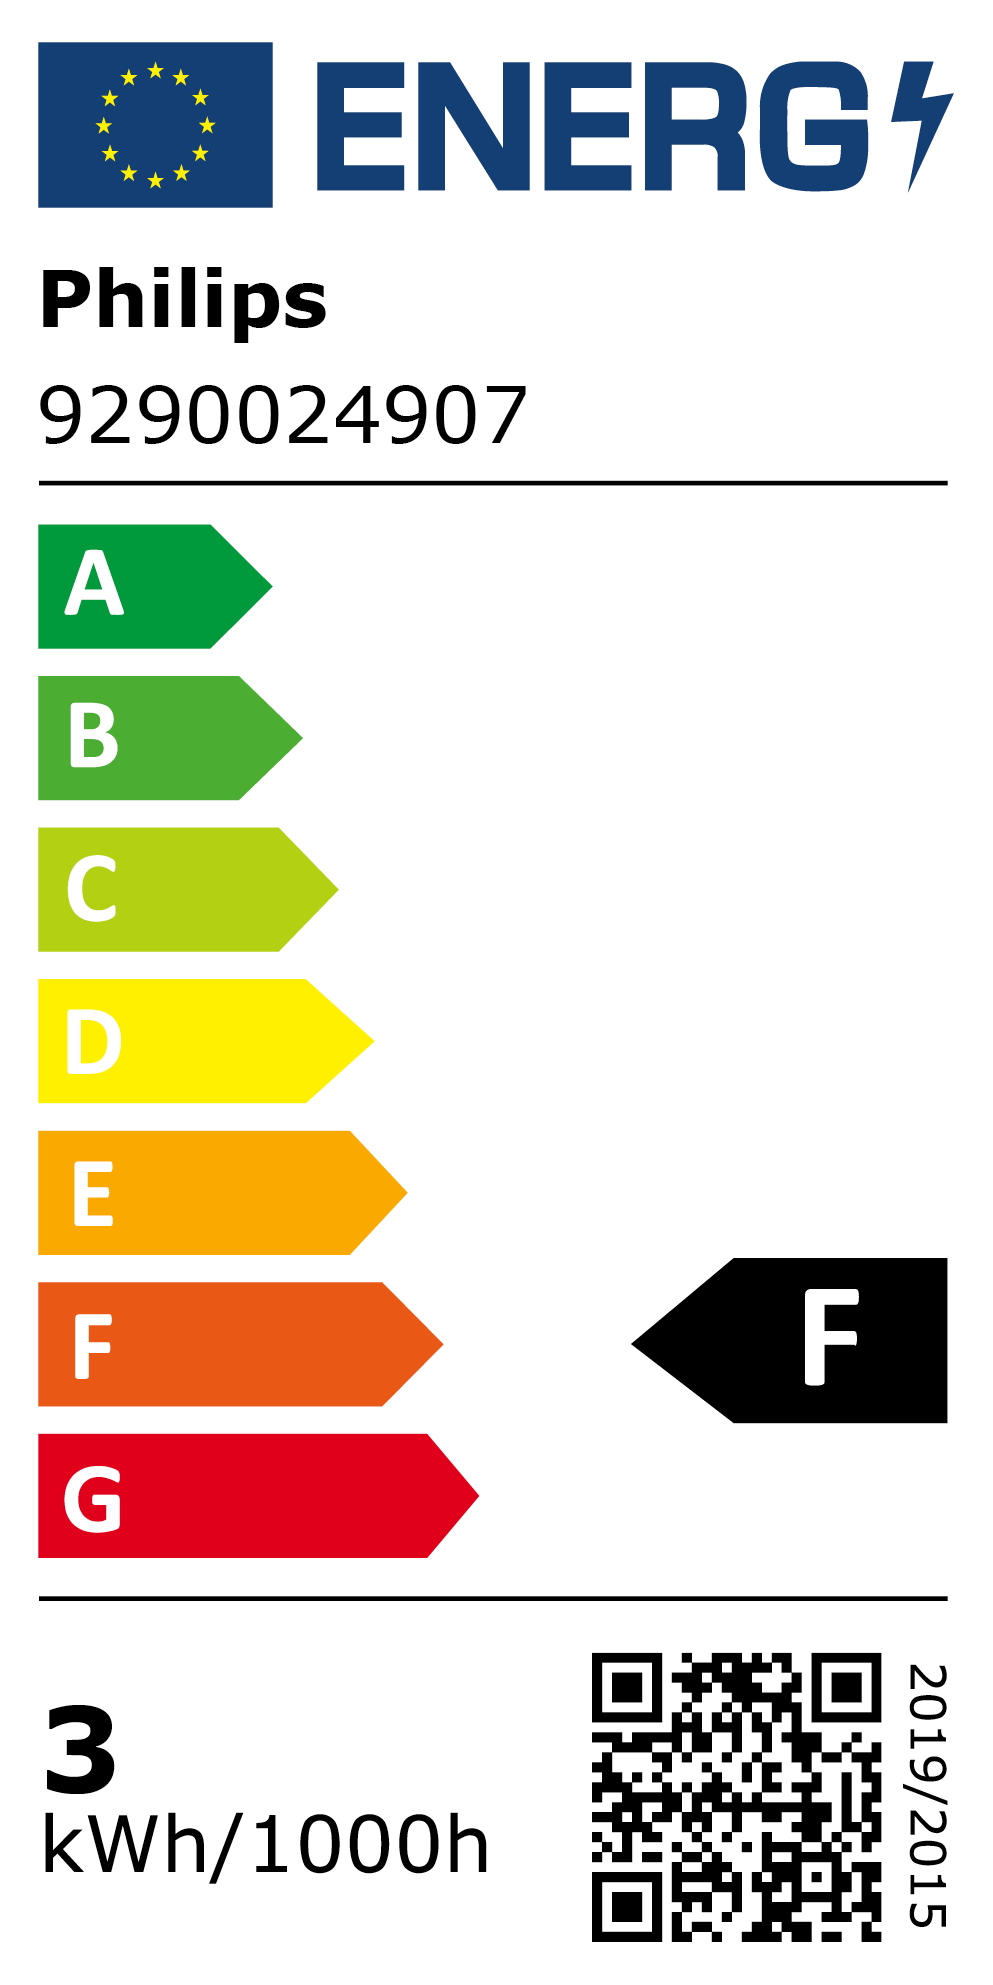 New 2021 Energy Rating Label: MPN 9290024907